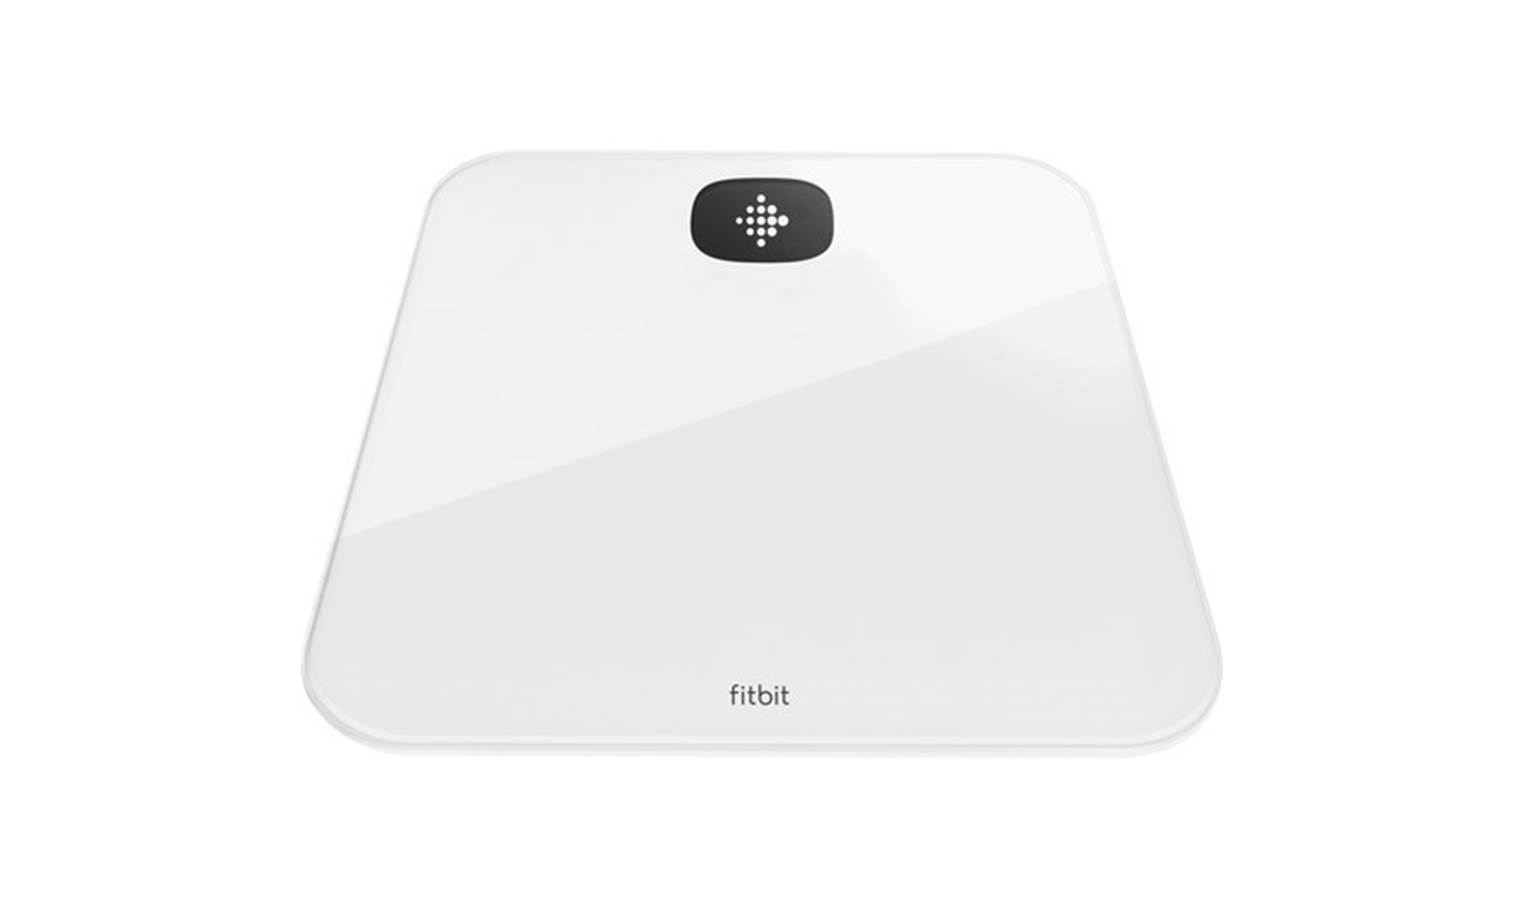 fitbit body composition scale